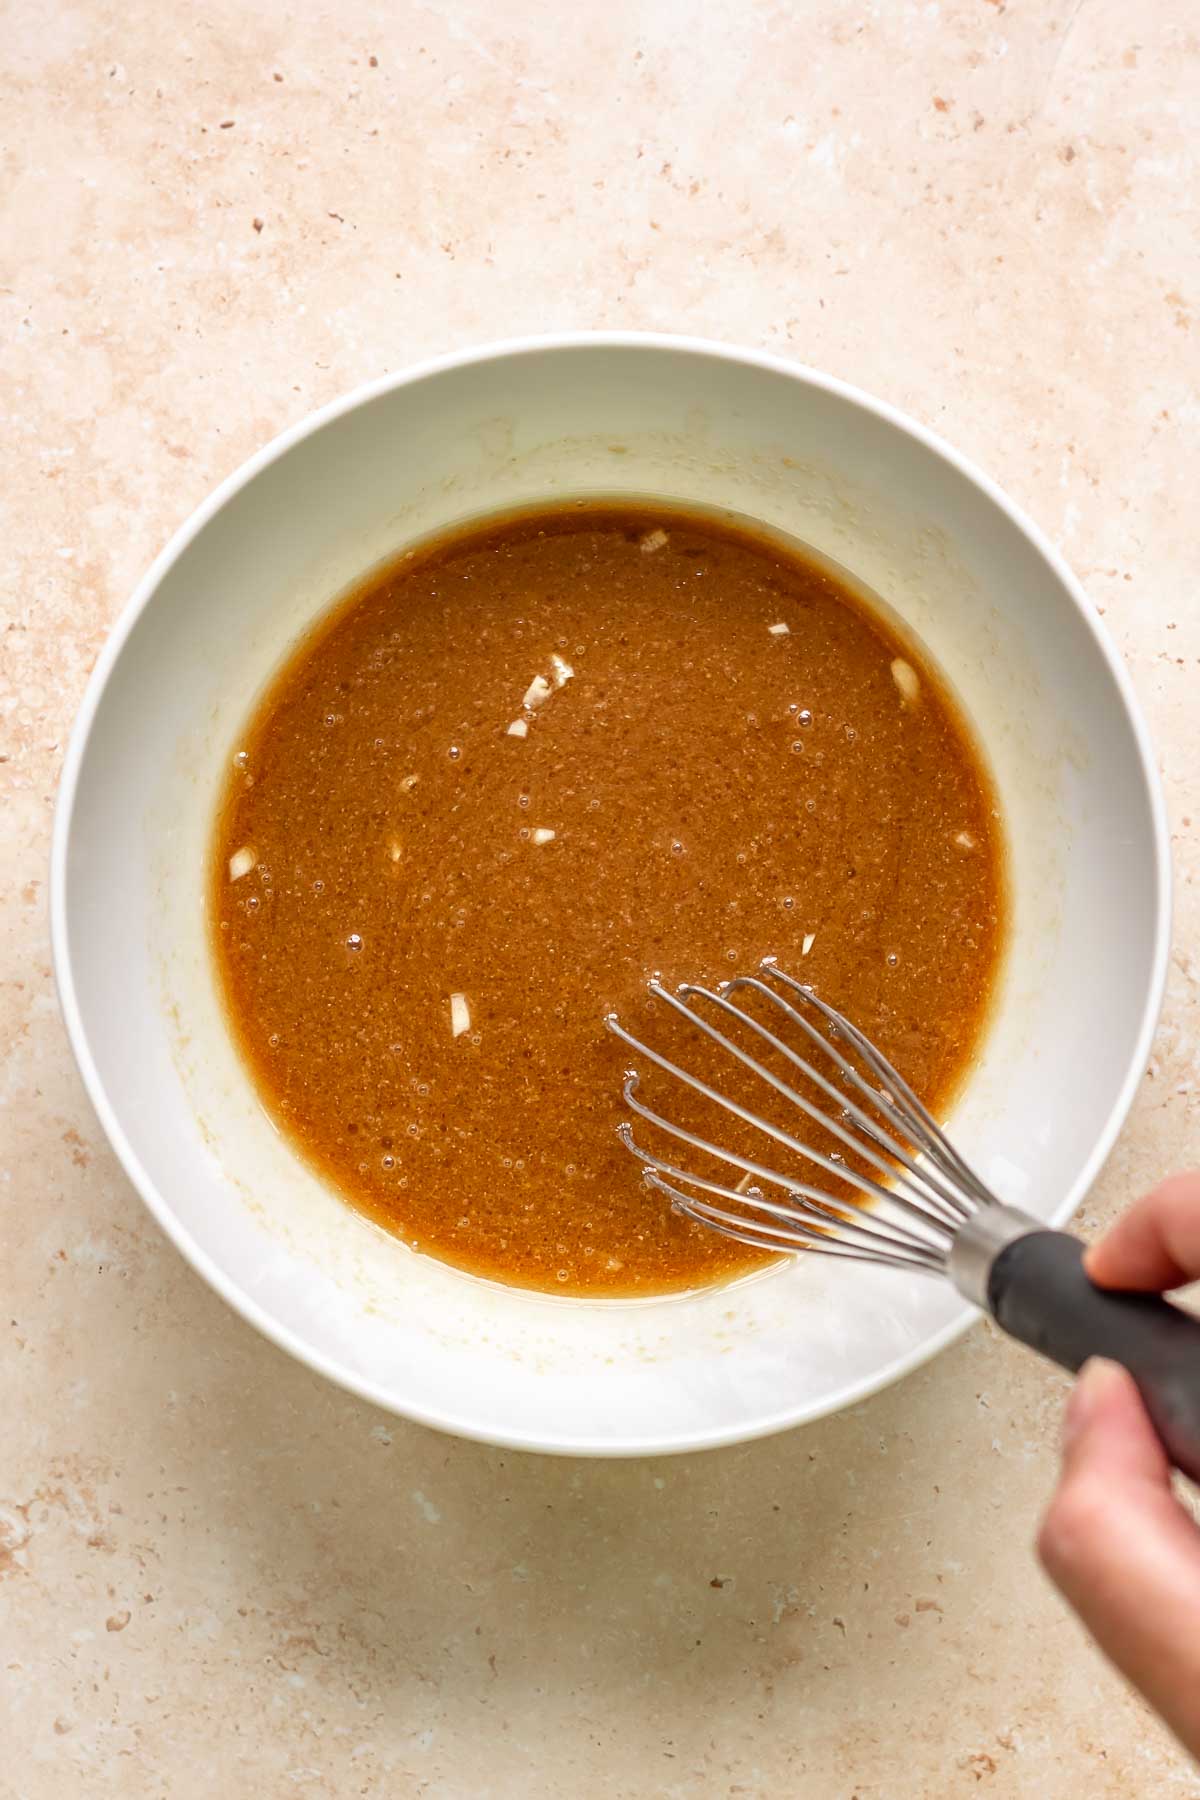 A whisk mixes steak marinade in a bowl.